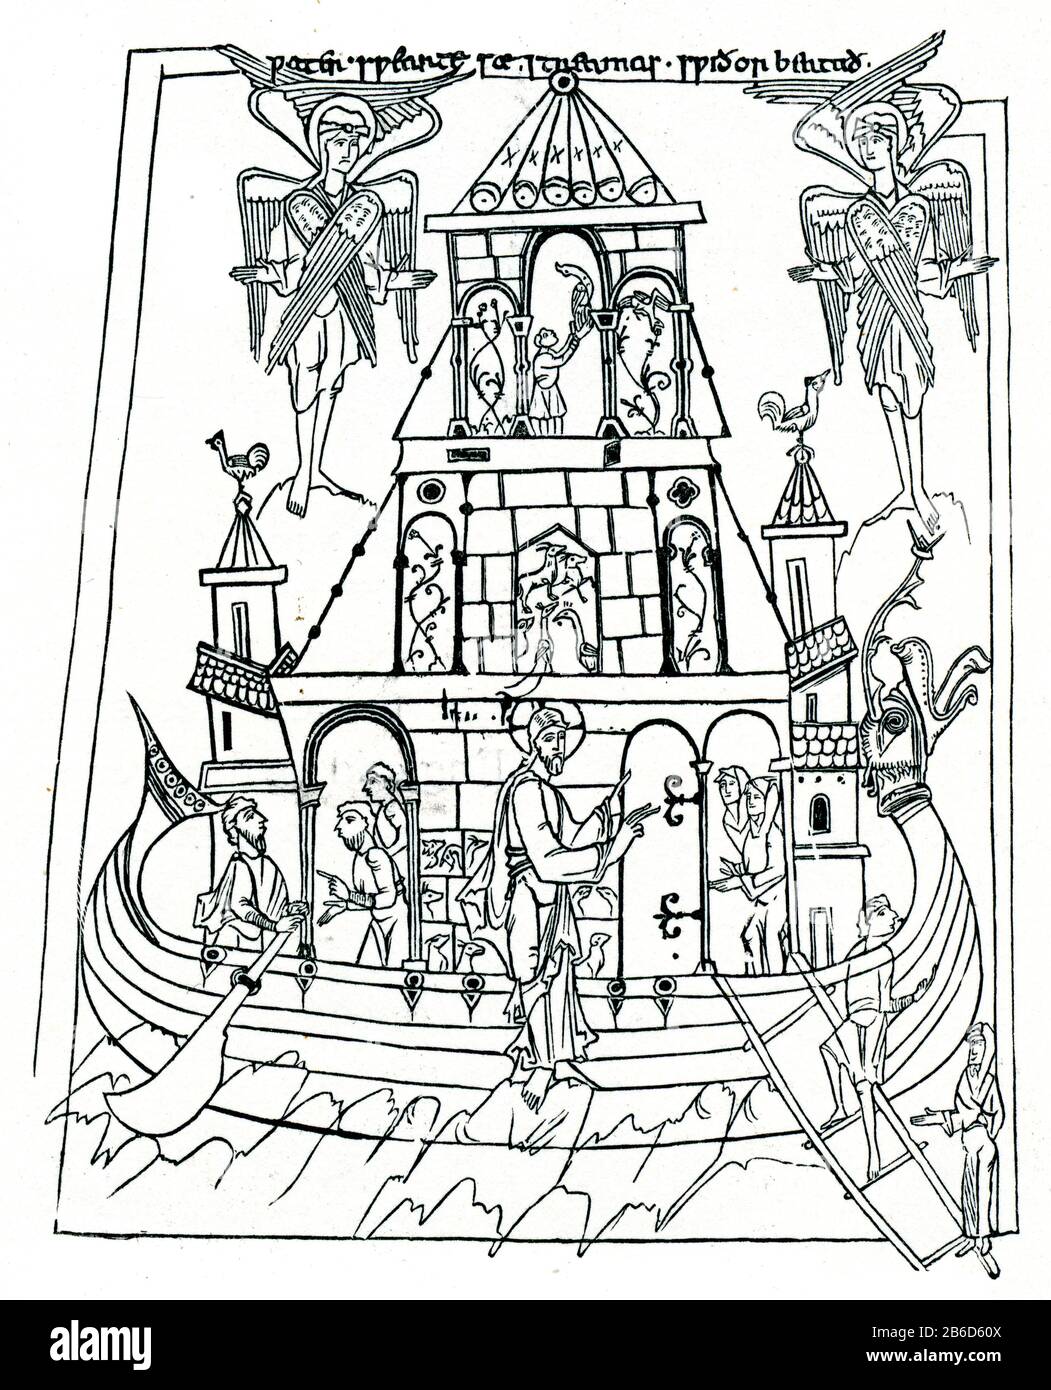 Noah's Ark from the Junius manuscript (Cædmon manuscript), 10th century. The Junius manuscript is one of the four major codices of Old English literature. It contains poetry dealing with Biblical subjects in Old English, the vernacular language of Anglo-Saxon England. The manuscript is made of four poems which have been given the titles Genesis, Exodus, Daniel, and Christ and Satan. For a long time, scholars believed them to be the work of Cædmon. However, this theory has been discarded due to the significant differences between the poems. MS Bodl. Junius II. Stock Photo